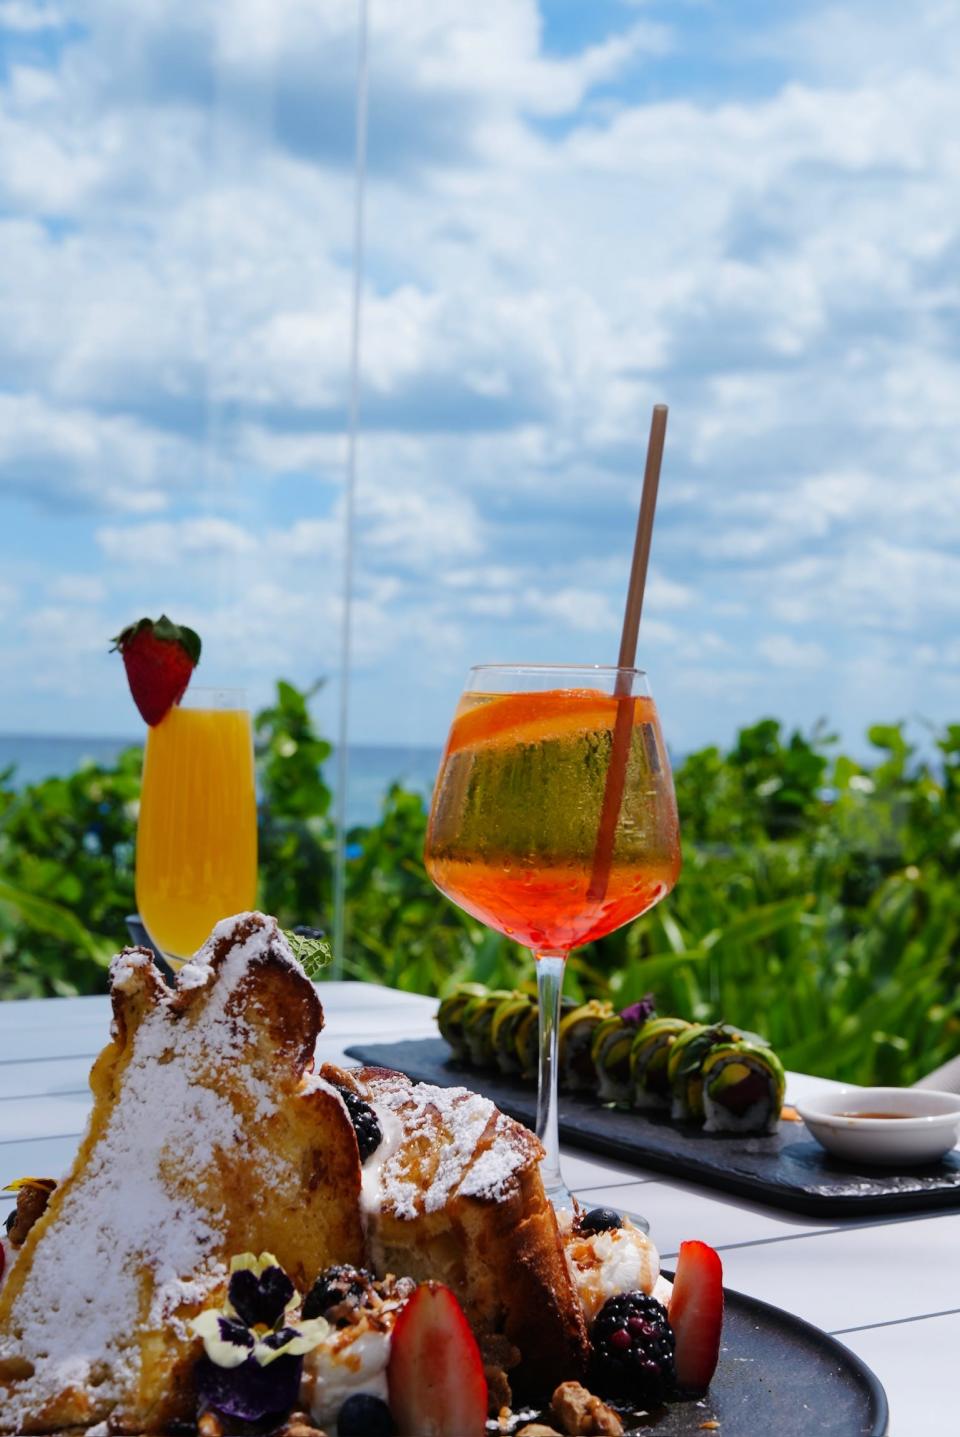 The coconut french toast is one of several options available on Mother's Day at Tideline Palm Beach Ocean Resort & Spa.